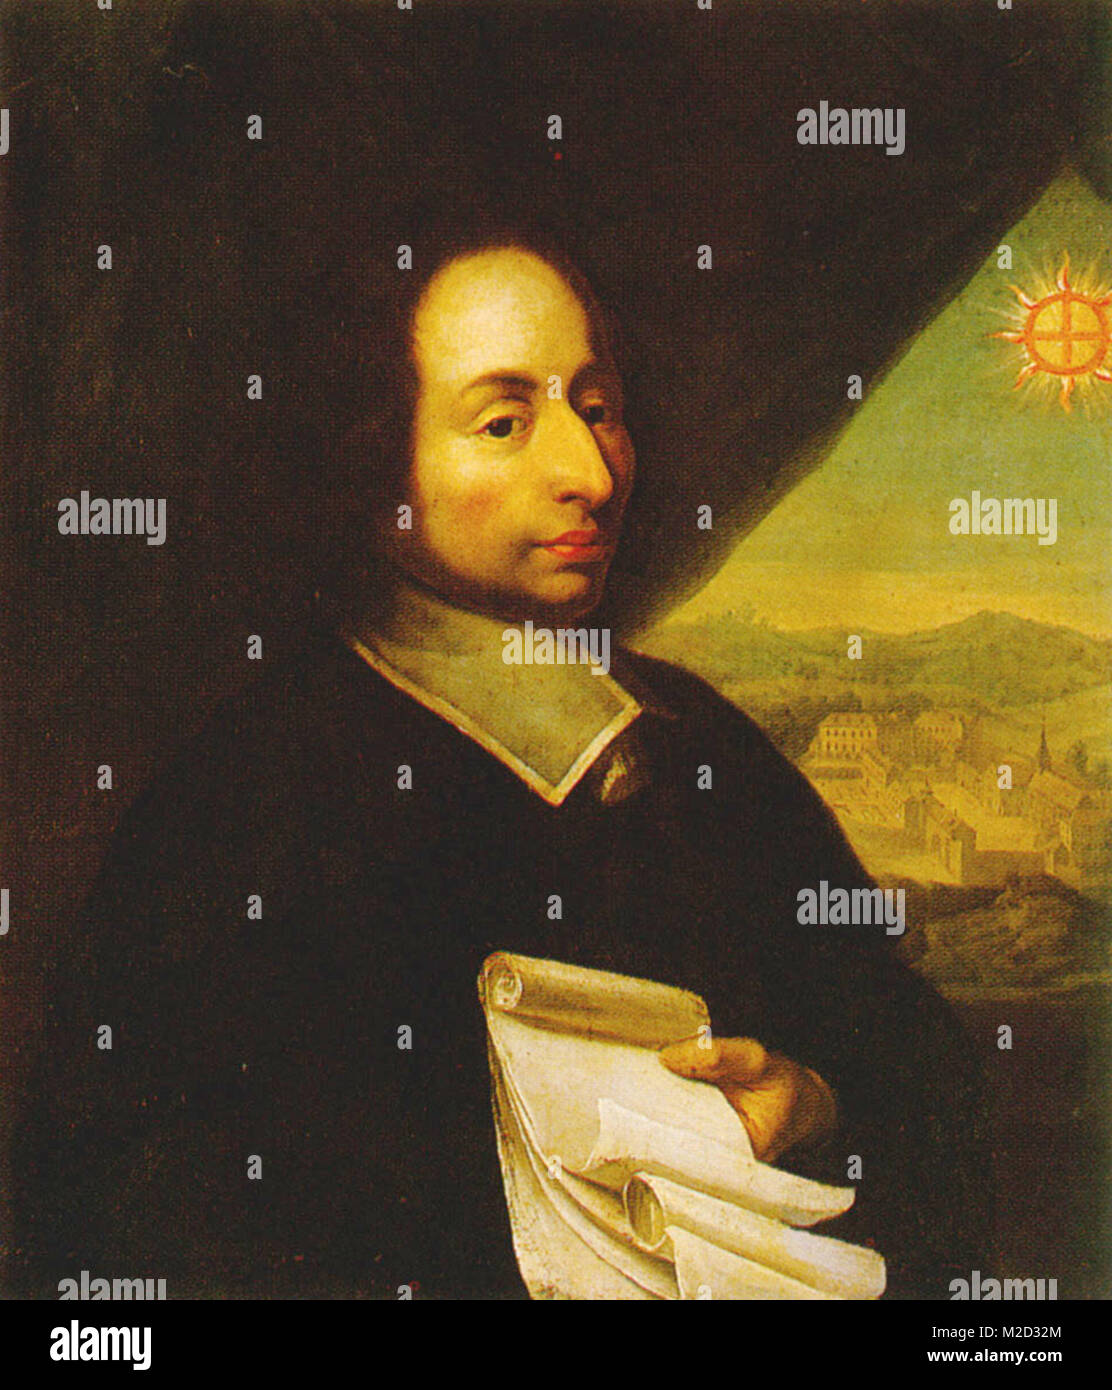 Blaise Pascal (1623 – 1662) French mathematician, physicist, inventor, writer and Catholic theologian. Stock Photo